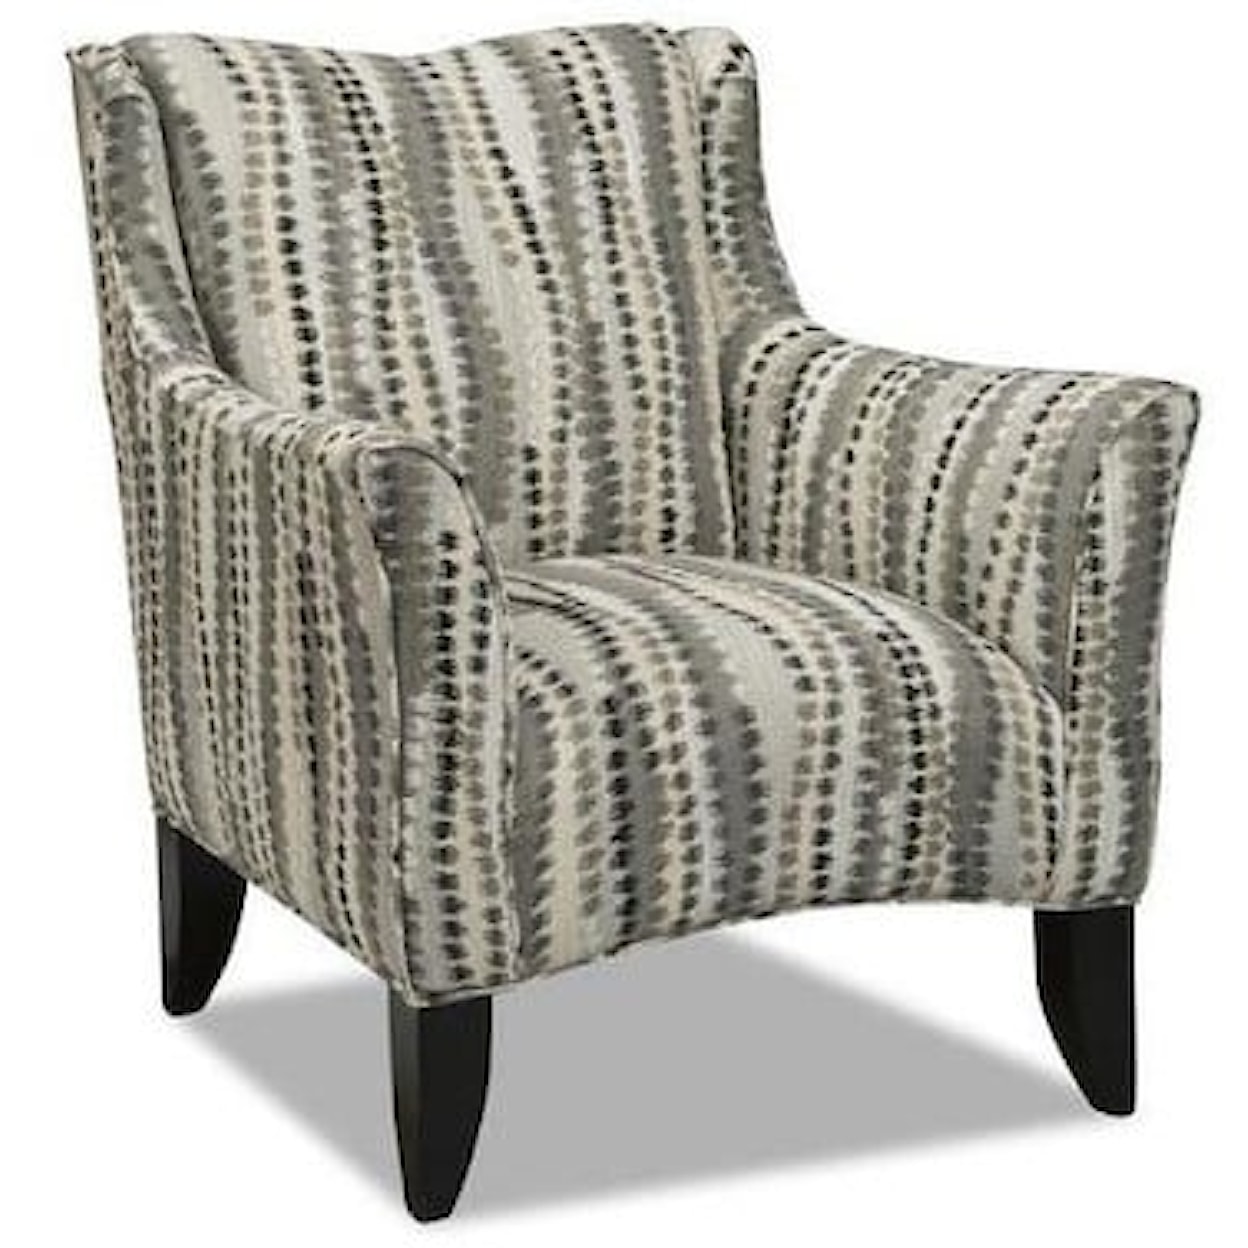 Southside Designs Lynura Occasional Chair